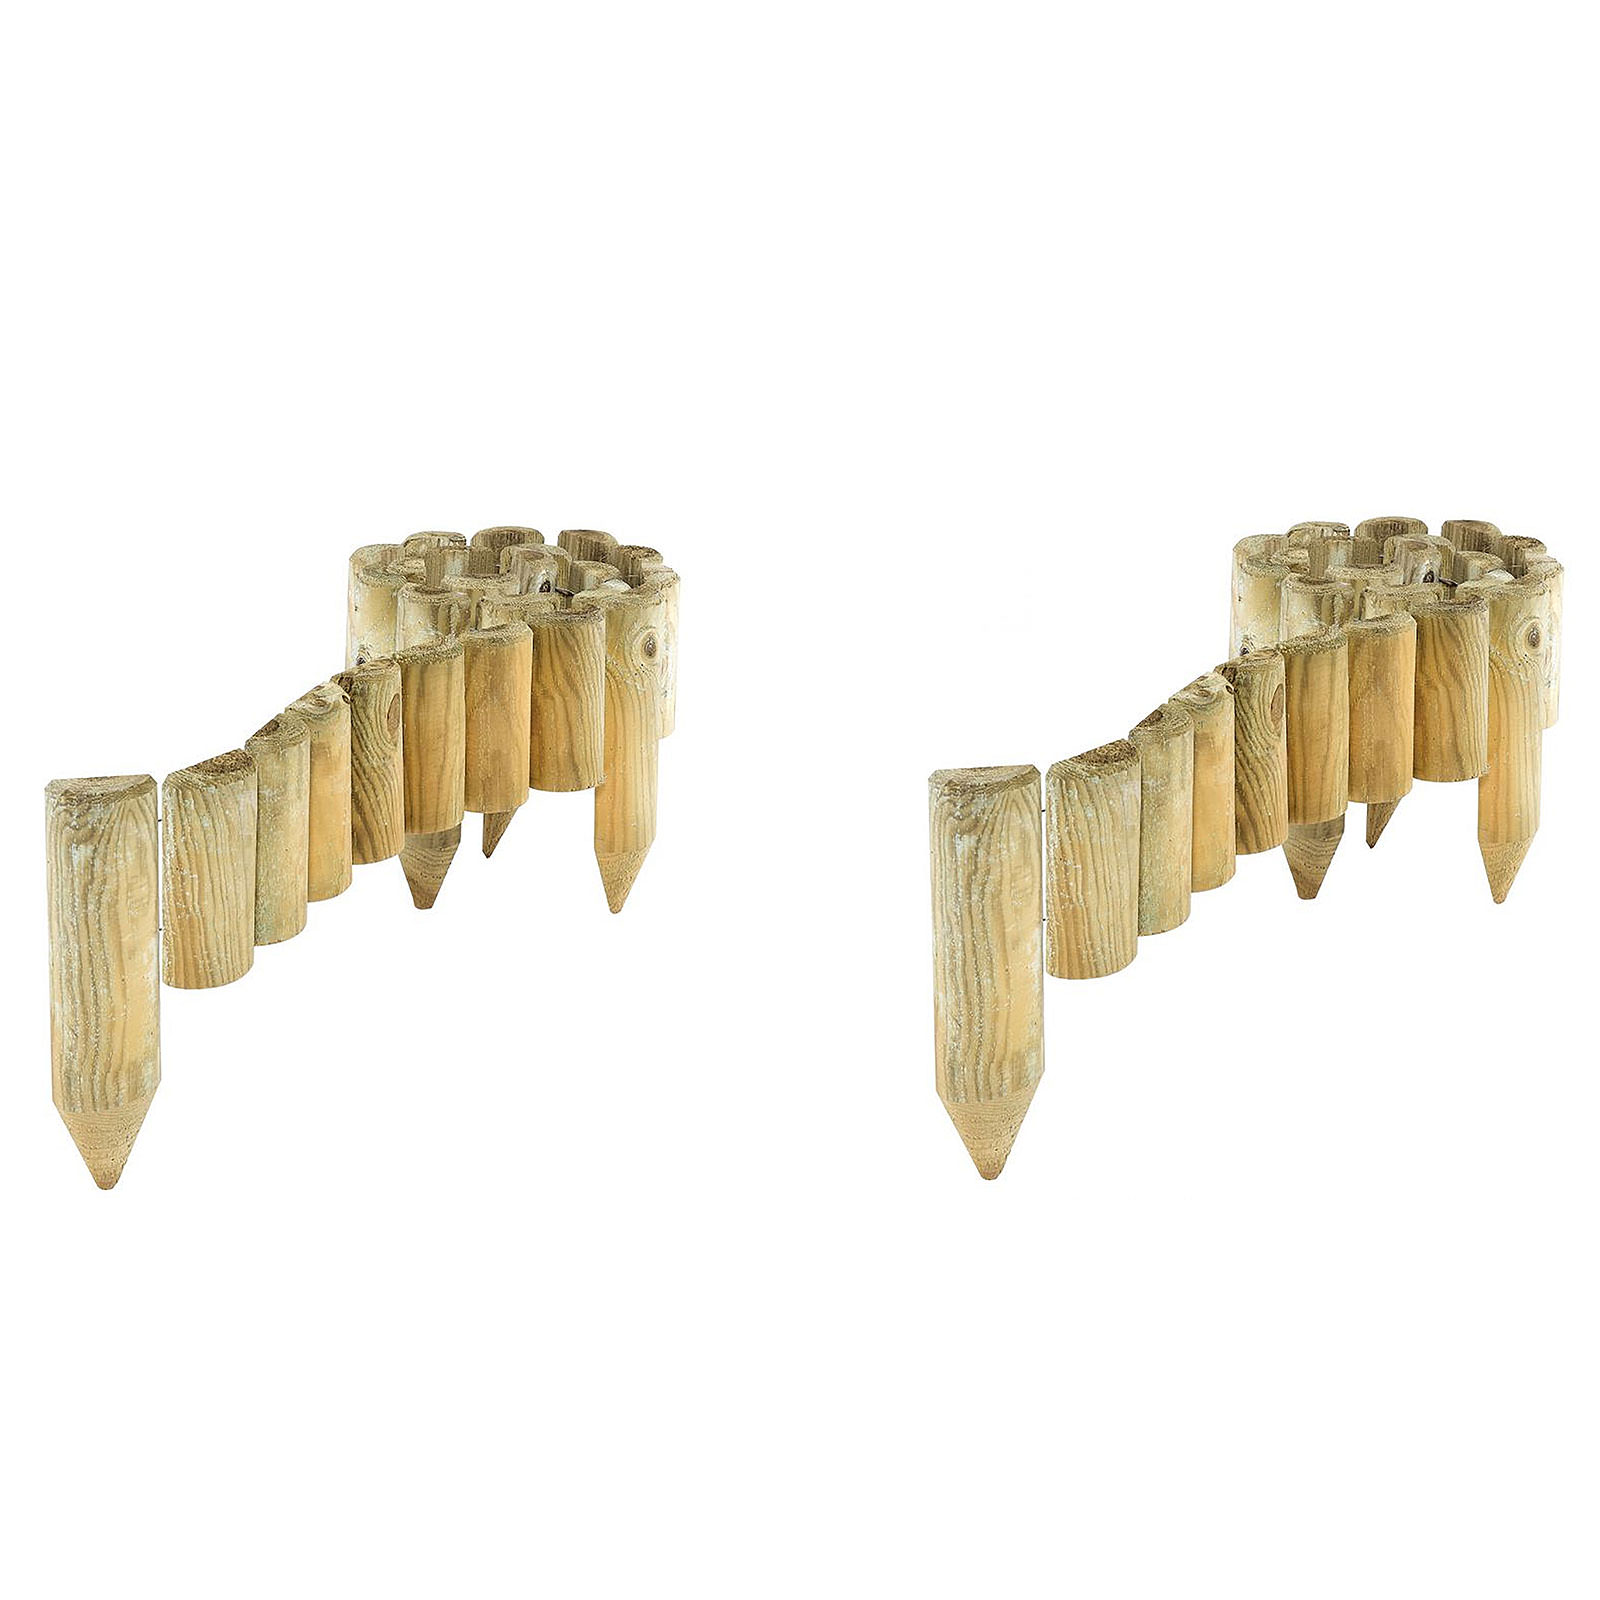 2 pack Rowlinson Easy Fix Spiked Border Roll 